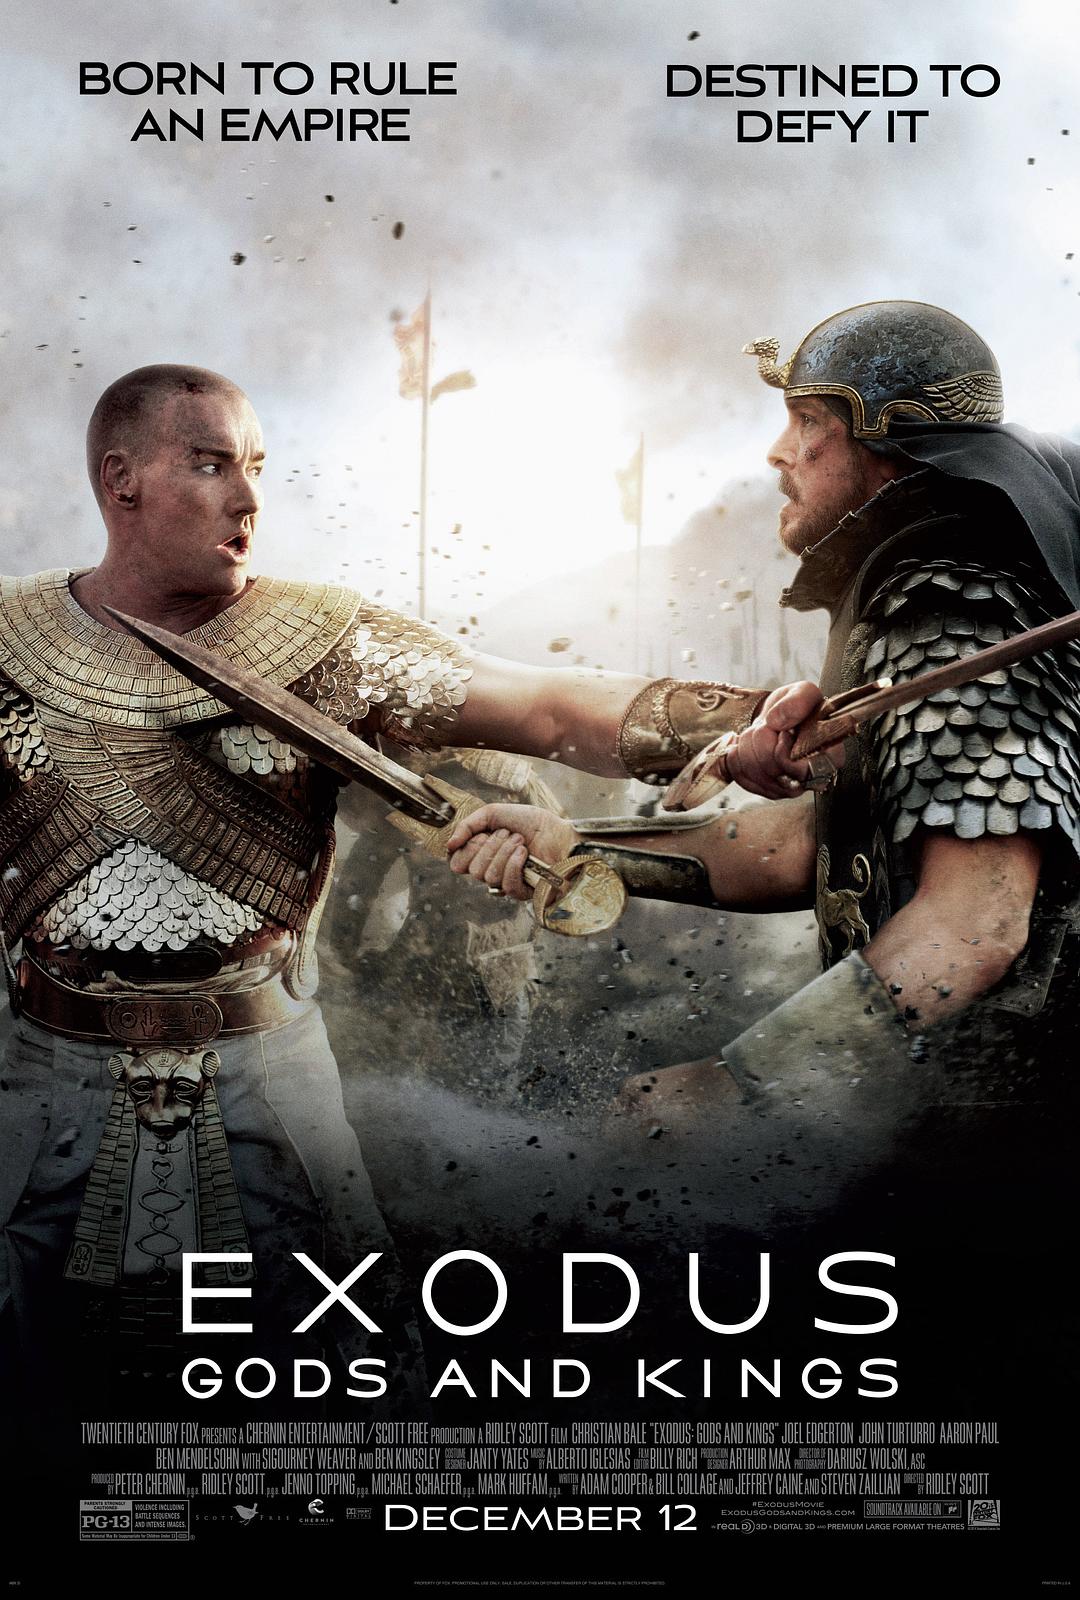  Exodus.Gods.and.Kings.2014.1080p.BluRay.X264-AMIABLE 10.93GB-1.png